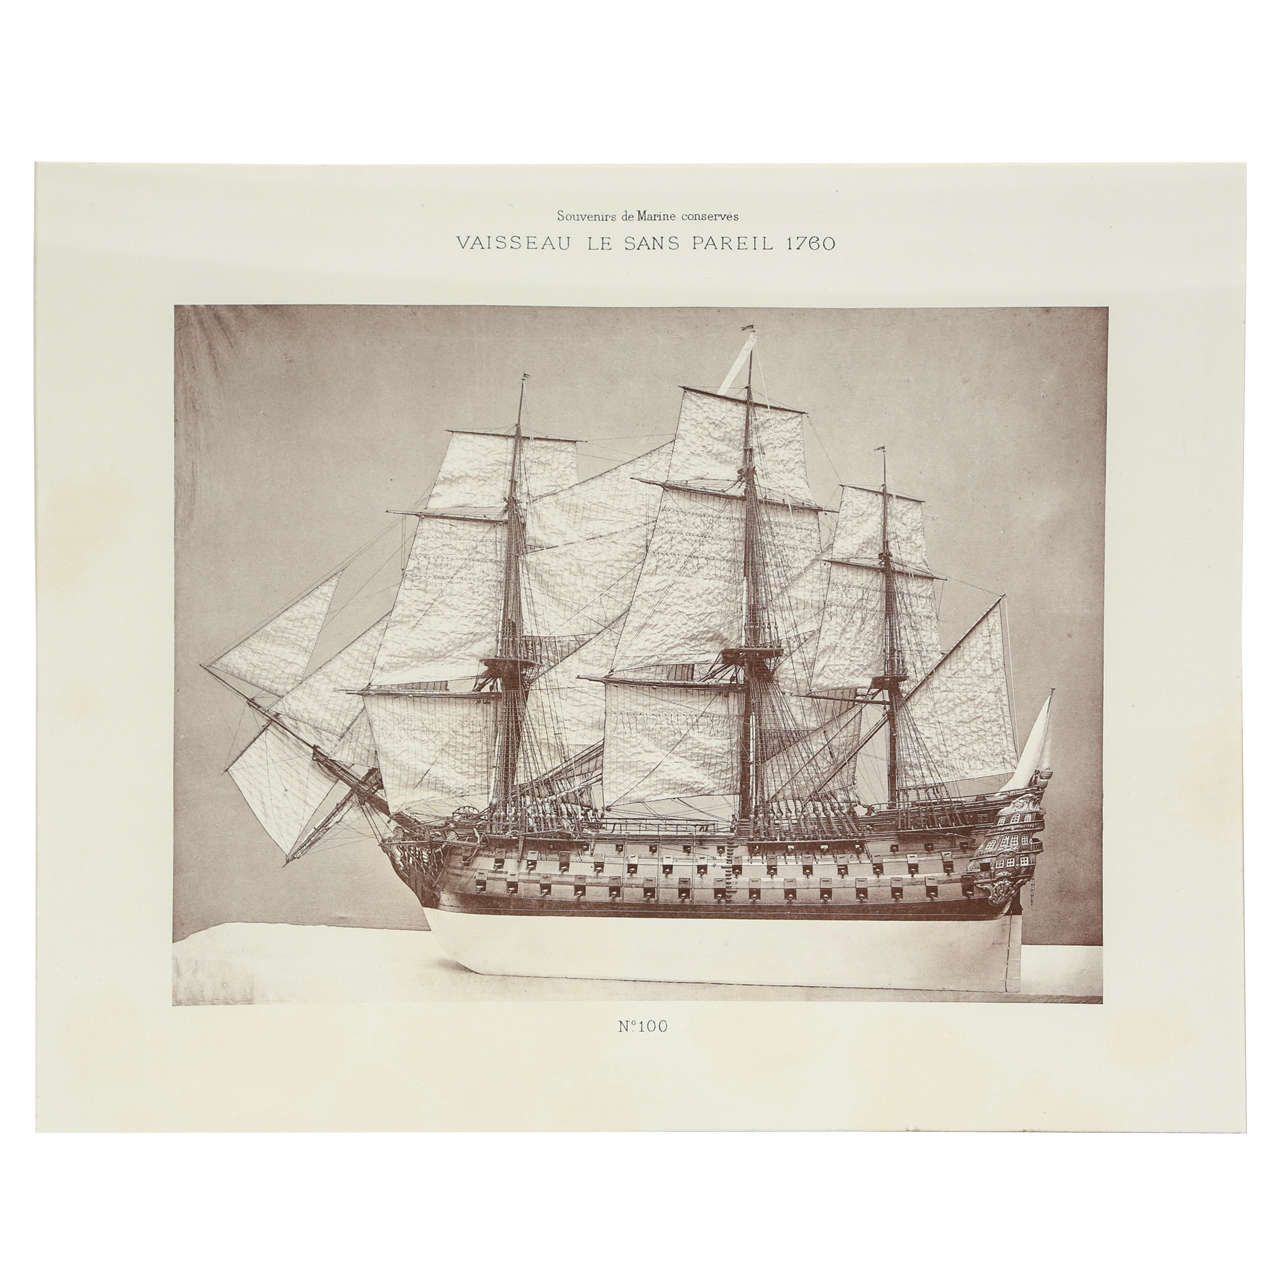 Antique ship photolithograph from the Paris Collections de Plans de Navires Bateaux Anciens, 1882. 

The Musée National de la Marine (National Navy Museum) in France has its origins with Louis XV. A collection of ship models and naval